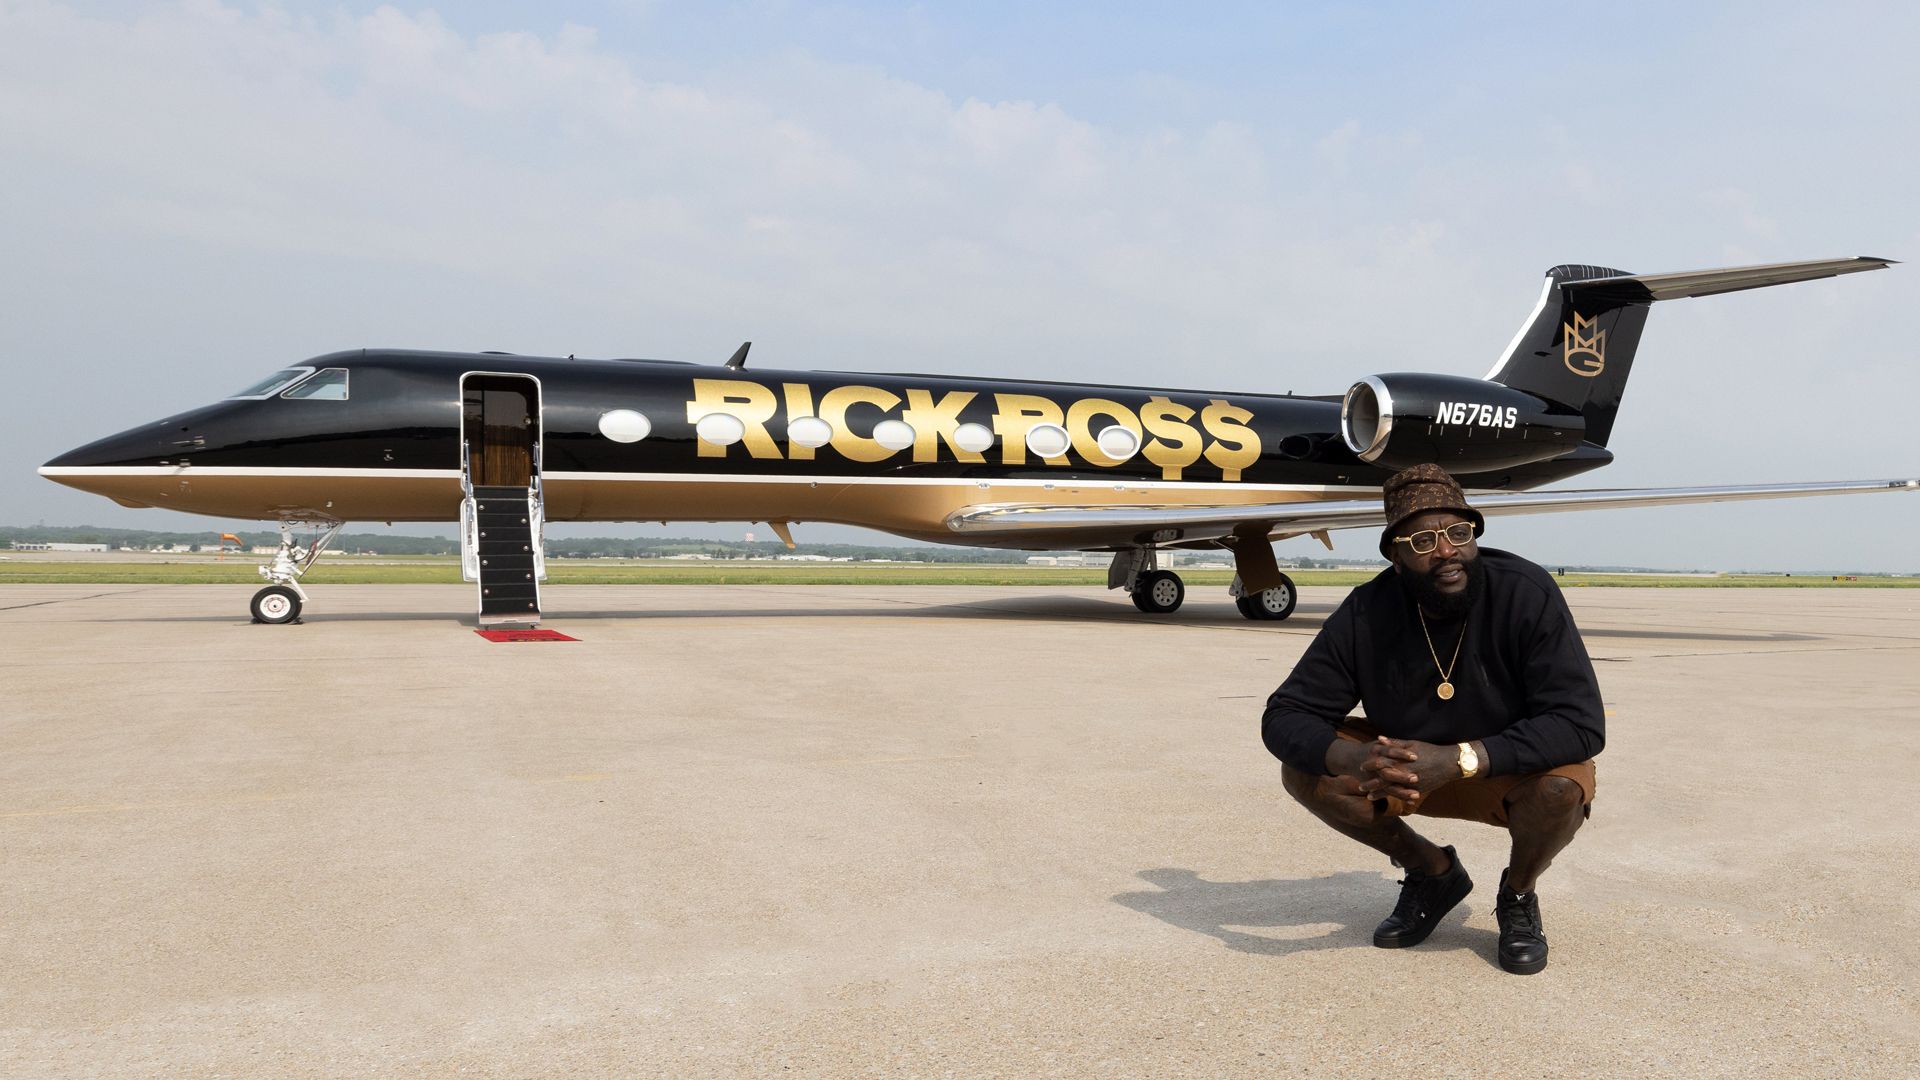 Rick Ross crouches in front of his black private plane that says "Rick Ross" in large gold letters